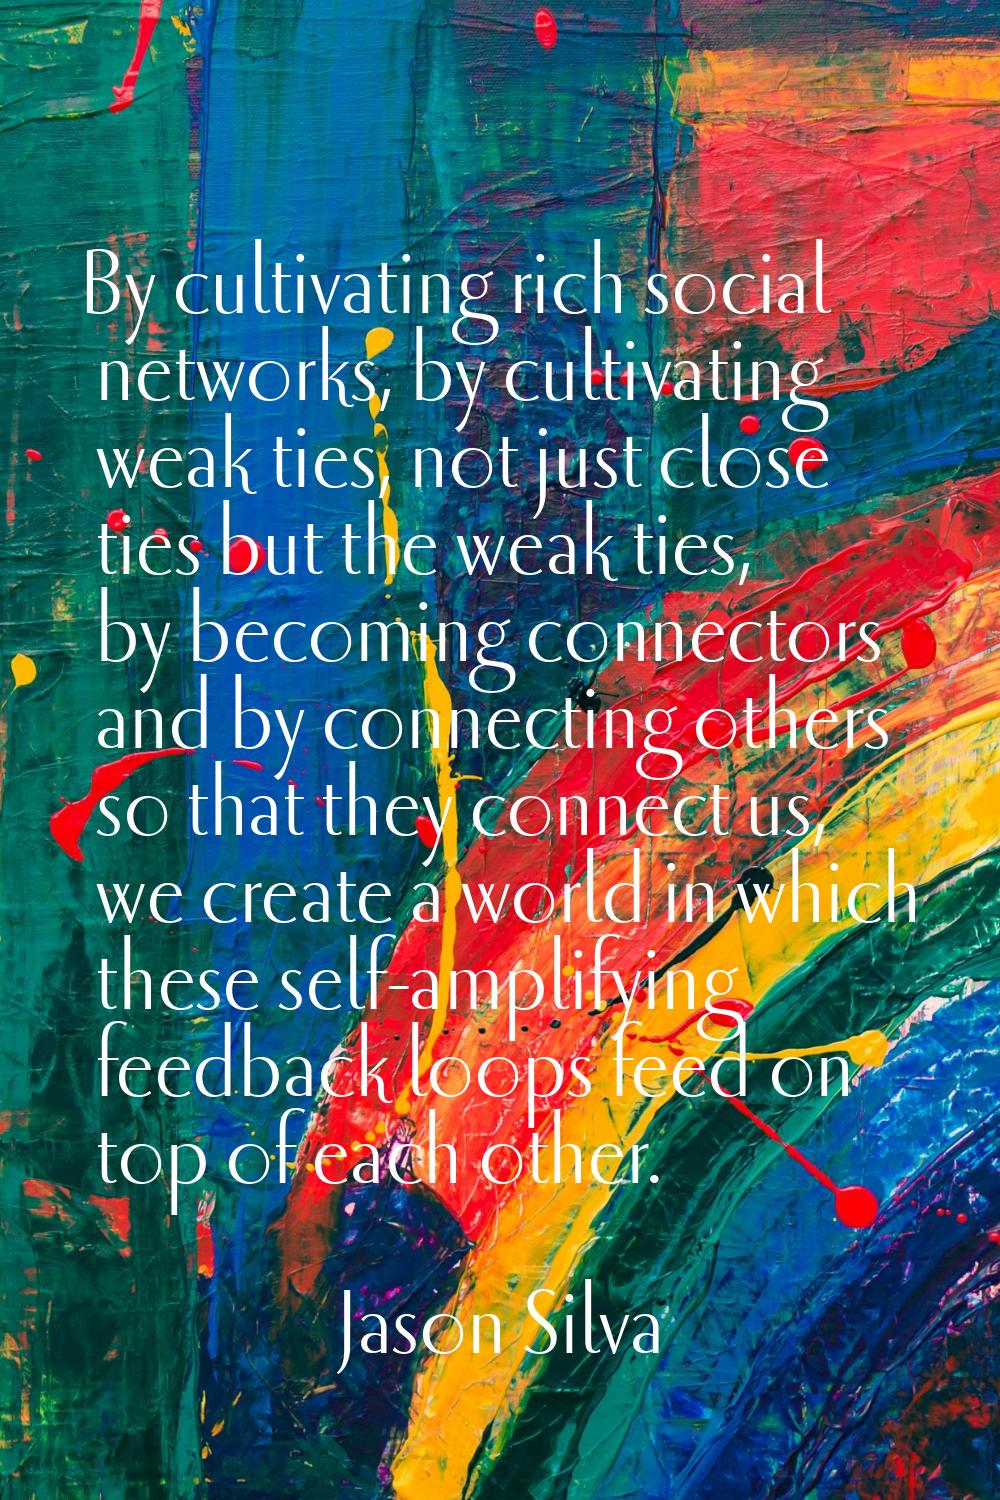 By cultivating rich social networks, by cultivating weak ties, not just close ties but the weak tie